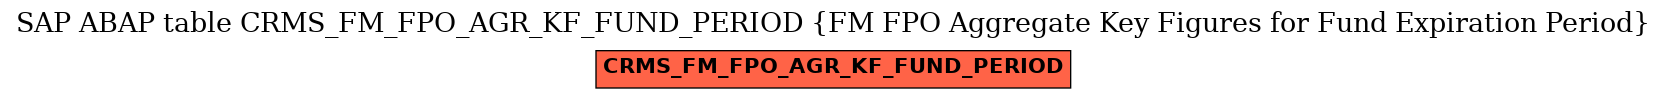 E-R Diagram for table CRMS_FM_FPO_AGR_KF_FUND_PERIOD (FM FPO Aggregate Key Figures for Fund Expiration Period)